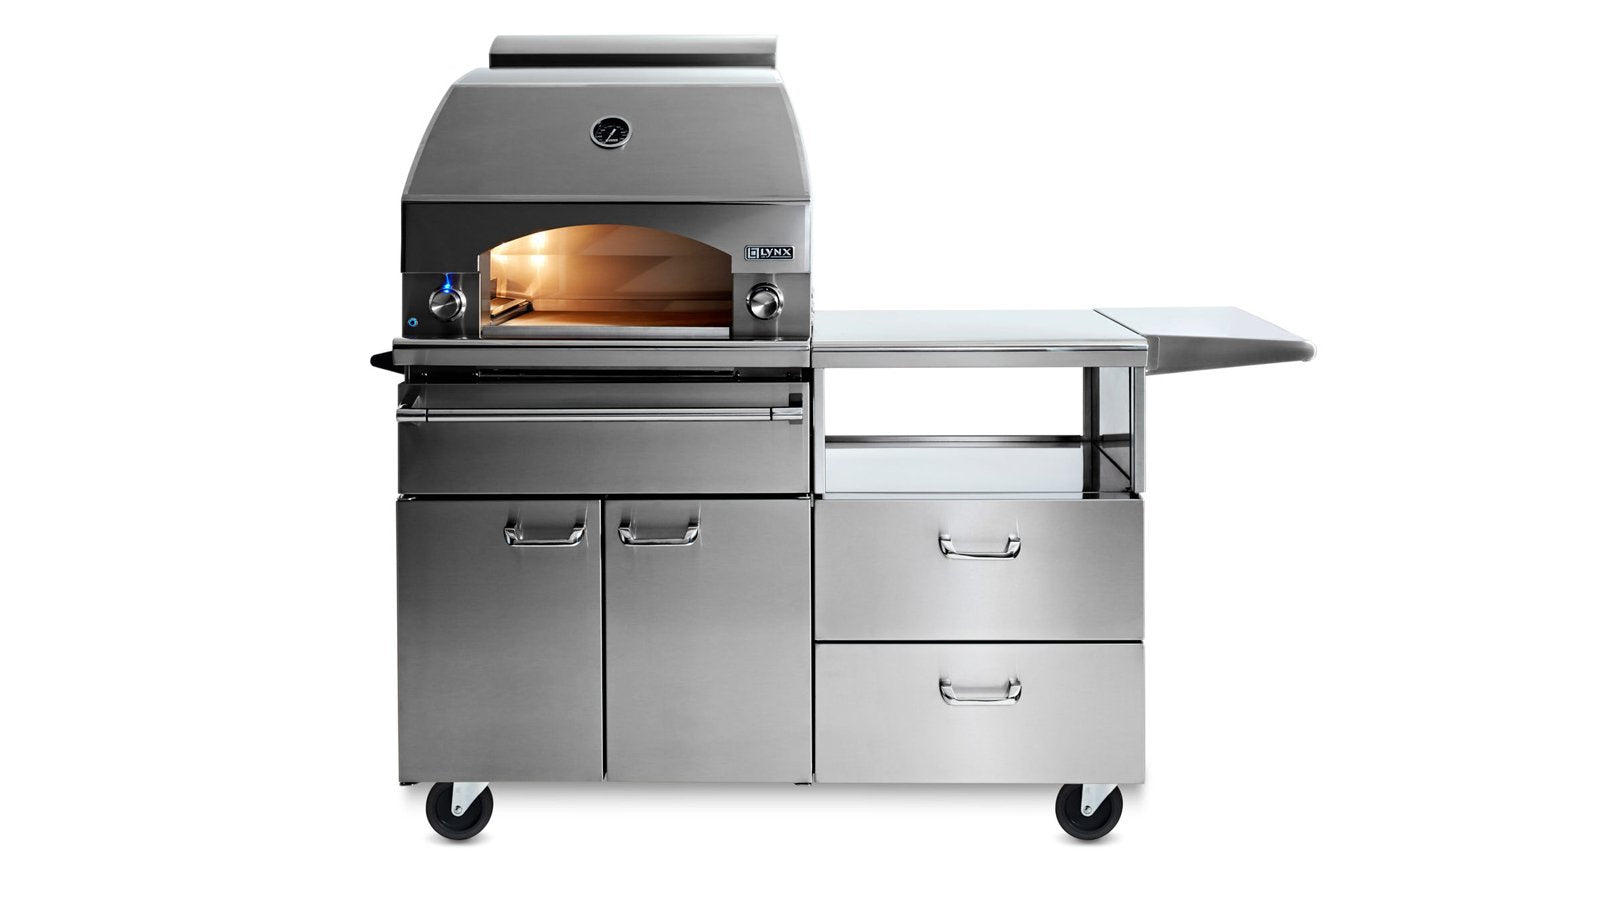 30" Napoli Outdoor Oven on Mobile Kitchen Cart